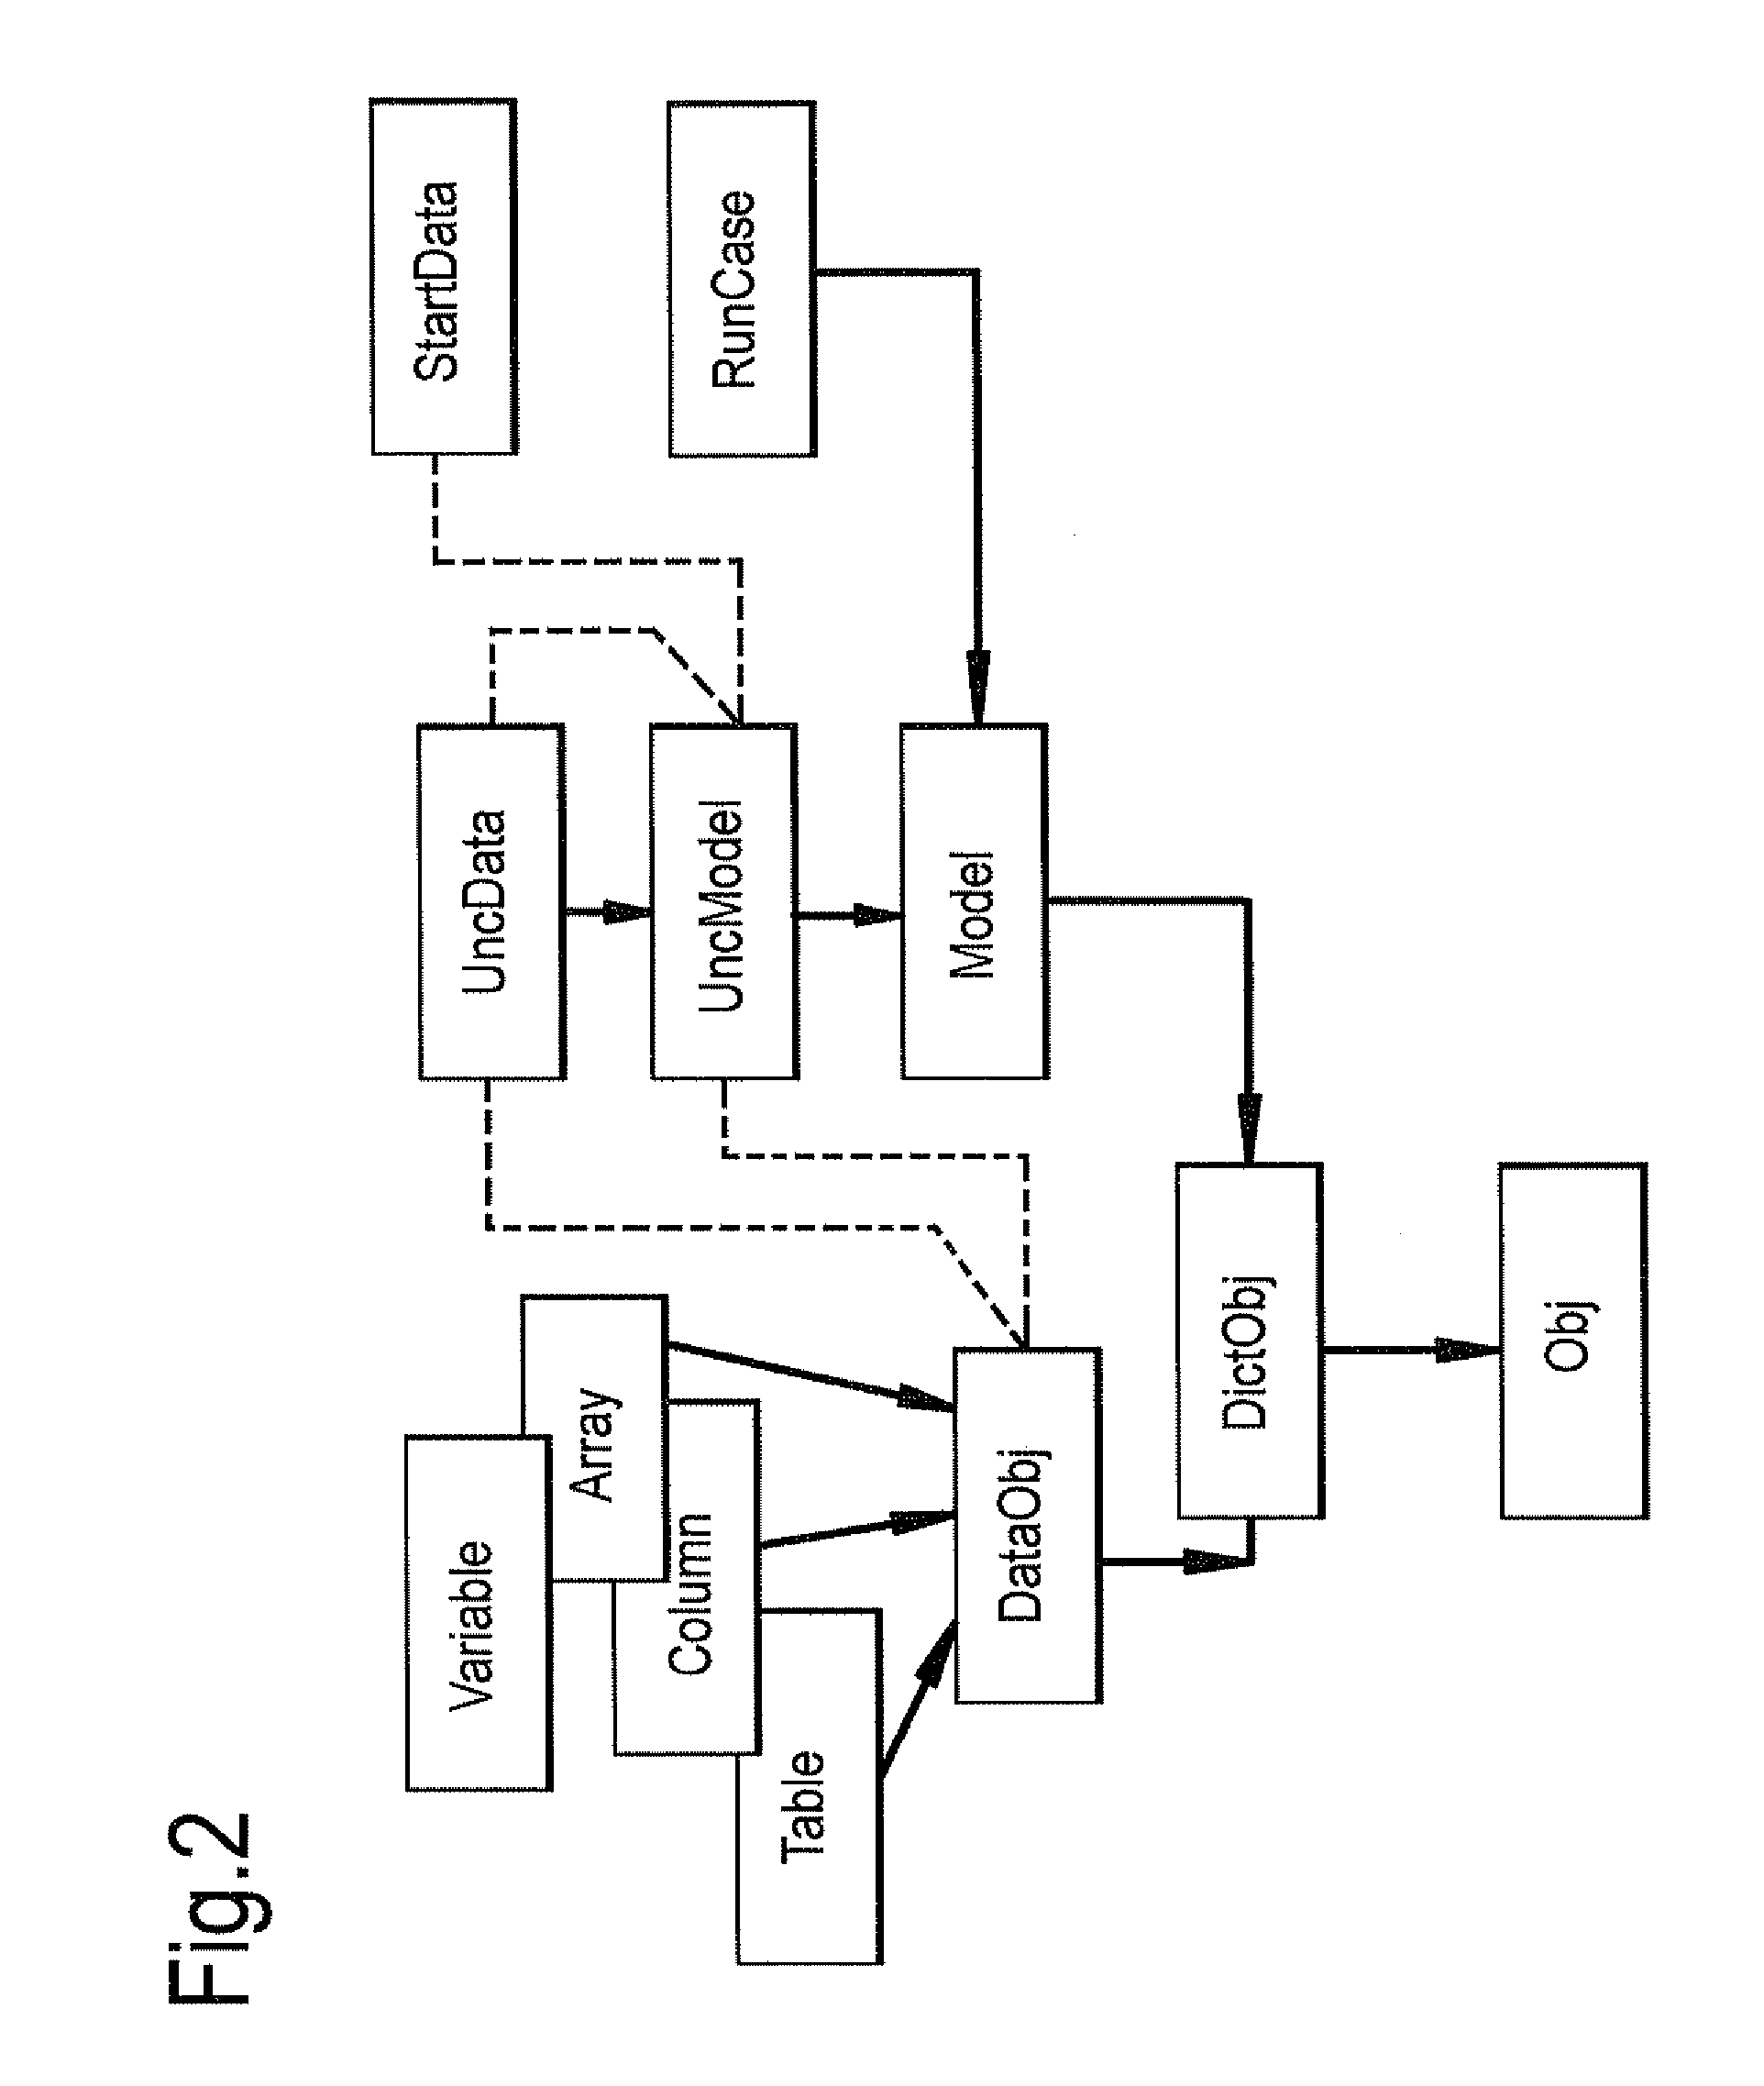 Method and system for simulating fluid flow in an underground formation with uncertain properties